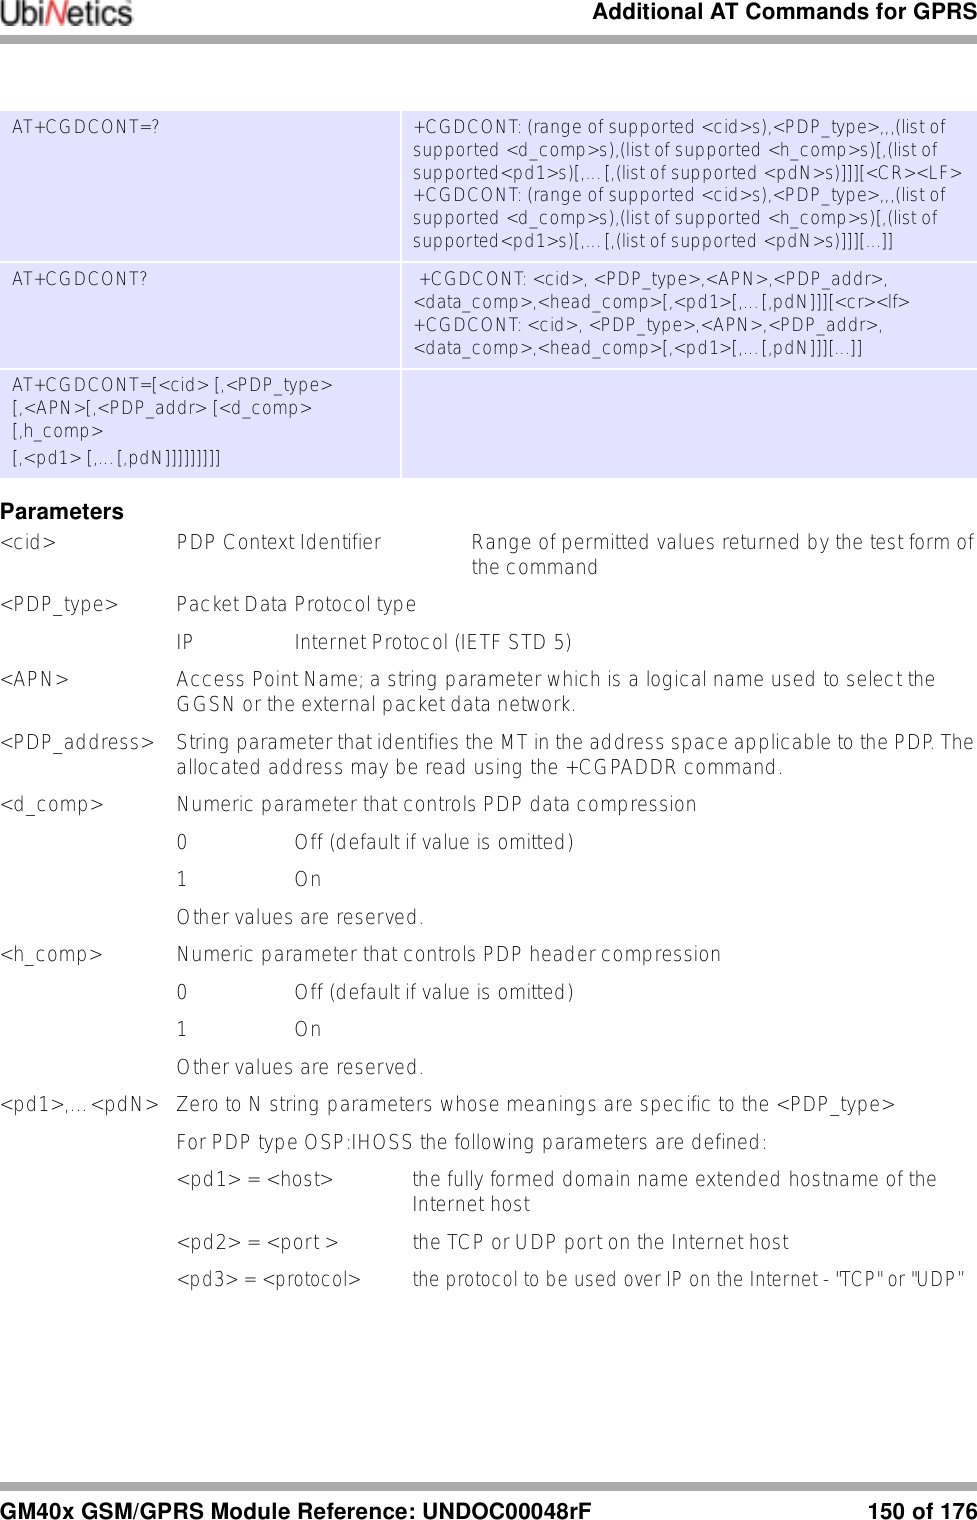 Additional AT Commands for GPRSGM40x GSM/GPRS Module Reference: UNDOC00048rF 150 of 176Parameters&lt;cid&gt; PDP Context Identifier Range of permitted values returned by the test form of the command&lt;PDP_type&gt; Packet Data Protocol typeIP  Internet Protocol (IETF STD 5)&lt;APN&gt; Access Point Name; a string parameter which is a logical name used to select the GGSN or the external packet data network.&lt;PDP_address&gt; String parameter that identifies the MT in the address space applicable to the PDP. The allocated address may be read using the +CGPADDR command.&lt;d_comp&gt; Numeric parameter that controls PDP data compression0 Off (default if value is omitted)1OnOther values are reserved.&lt;h_comp&gt; Numeric parameter that controls PDP header compression0  Off (default if value is omitted)1OnOther values are reserved.&lt;pd1&gt;,…&lt;pdN&gt; Zero to N string parameters whose meanings are specific to the &lt;PDP_type&gt;For PDP type OSP:IHOSS the following parameters are defined:&lt;pd1&gt; = &lt;host&gt;  the fully formed domain name extended hostname of the Internet host&lt;pd2&gt; = &lt;port &gt;  the TCP or UDP port on the Internet host&lt;pd3&gt; = &lt;protocol&gt;  the protocol to be used over IP on the Internet - &quot;TCP&quot; or &quot;UDP”AT+CGDCONT=?  +CGDCONT: (range of supported &lt;cid&gt;s),&lt;PDP_type&gt;,,,(list of supported &lt;d_comp&gt;s),(list of supported &lt;h_comp&gt;s)[,(list of supported&lt;pd1&gt;s)[,…[,(list of supported &lt;pdN&gt;s)]]][&lt;CR&gt;&lt;LF&gt;+CGDCONT: (range of supported &lt;cid&gt;s),&lt;PDP_type&gt;,,,(list of supported &lt;d_comp&gt;s),(list of supported &lt;h_comp&gt;s)[,(list of supported&lt;pd1&gt;s)[,…[,(list of supported &lt;pdN&gt;s)]]][...]]AT+CGDCONT?  +CGDCONT: &lt;cid&gt;, &lt;PDP_type&gt;,&lt;APN&gt;,&lt;PDP_addr&gt;, &lt;data_comp&gt;,&lt;head_comp&gt;[,&lt;pd1&gt;[,…[,pdN]]][&lt;cr&gt;&lt;lf&gt;+CGDCONT: &lt;cid&gt;, &lt;PDP_type&gt;,&lt;APN&gt;,&lt;PDP_addr&gt;, &lt;data_comp&gt;,&lt;head_comp&gt;[,&lt;pd1&gt;[,…[,pdN]]][...]]AT+CGDCONT=[&lt;cid&gt; [,&lt;PDP_type&gt; [,&lt;APN&gt;[,&lt;PDP_addr&gt; [&lt;d_comp&gt; [,h_comp&gt;[,&lt;pd1&gt; [,…[,pdN]]]]]]]]]